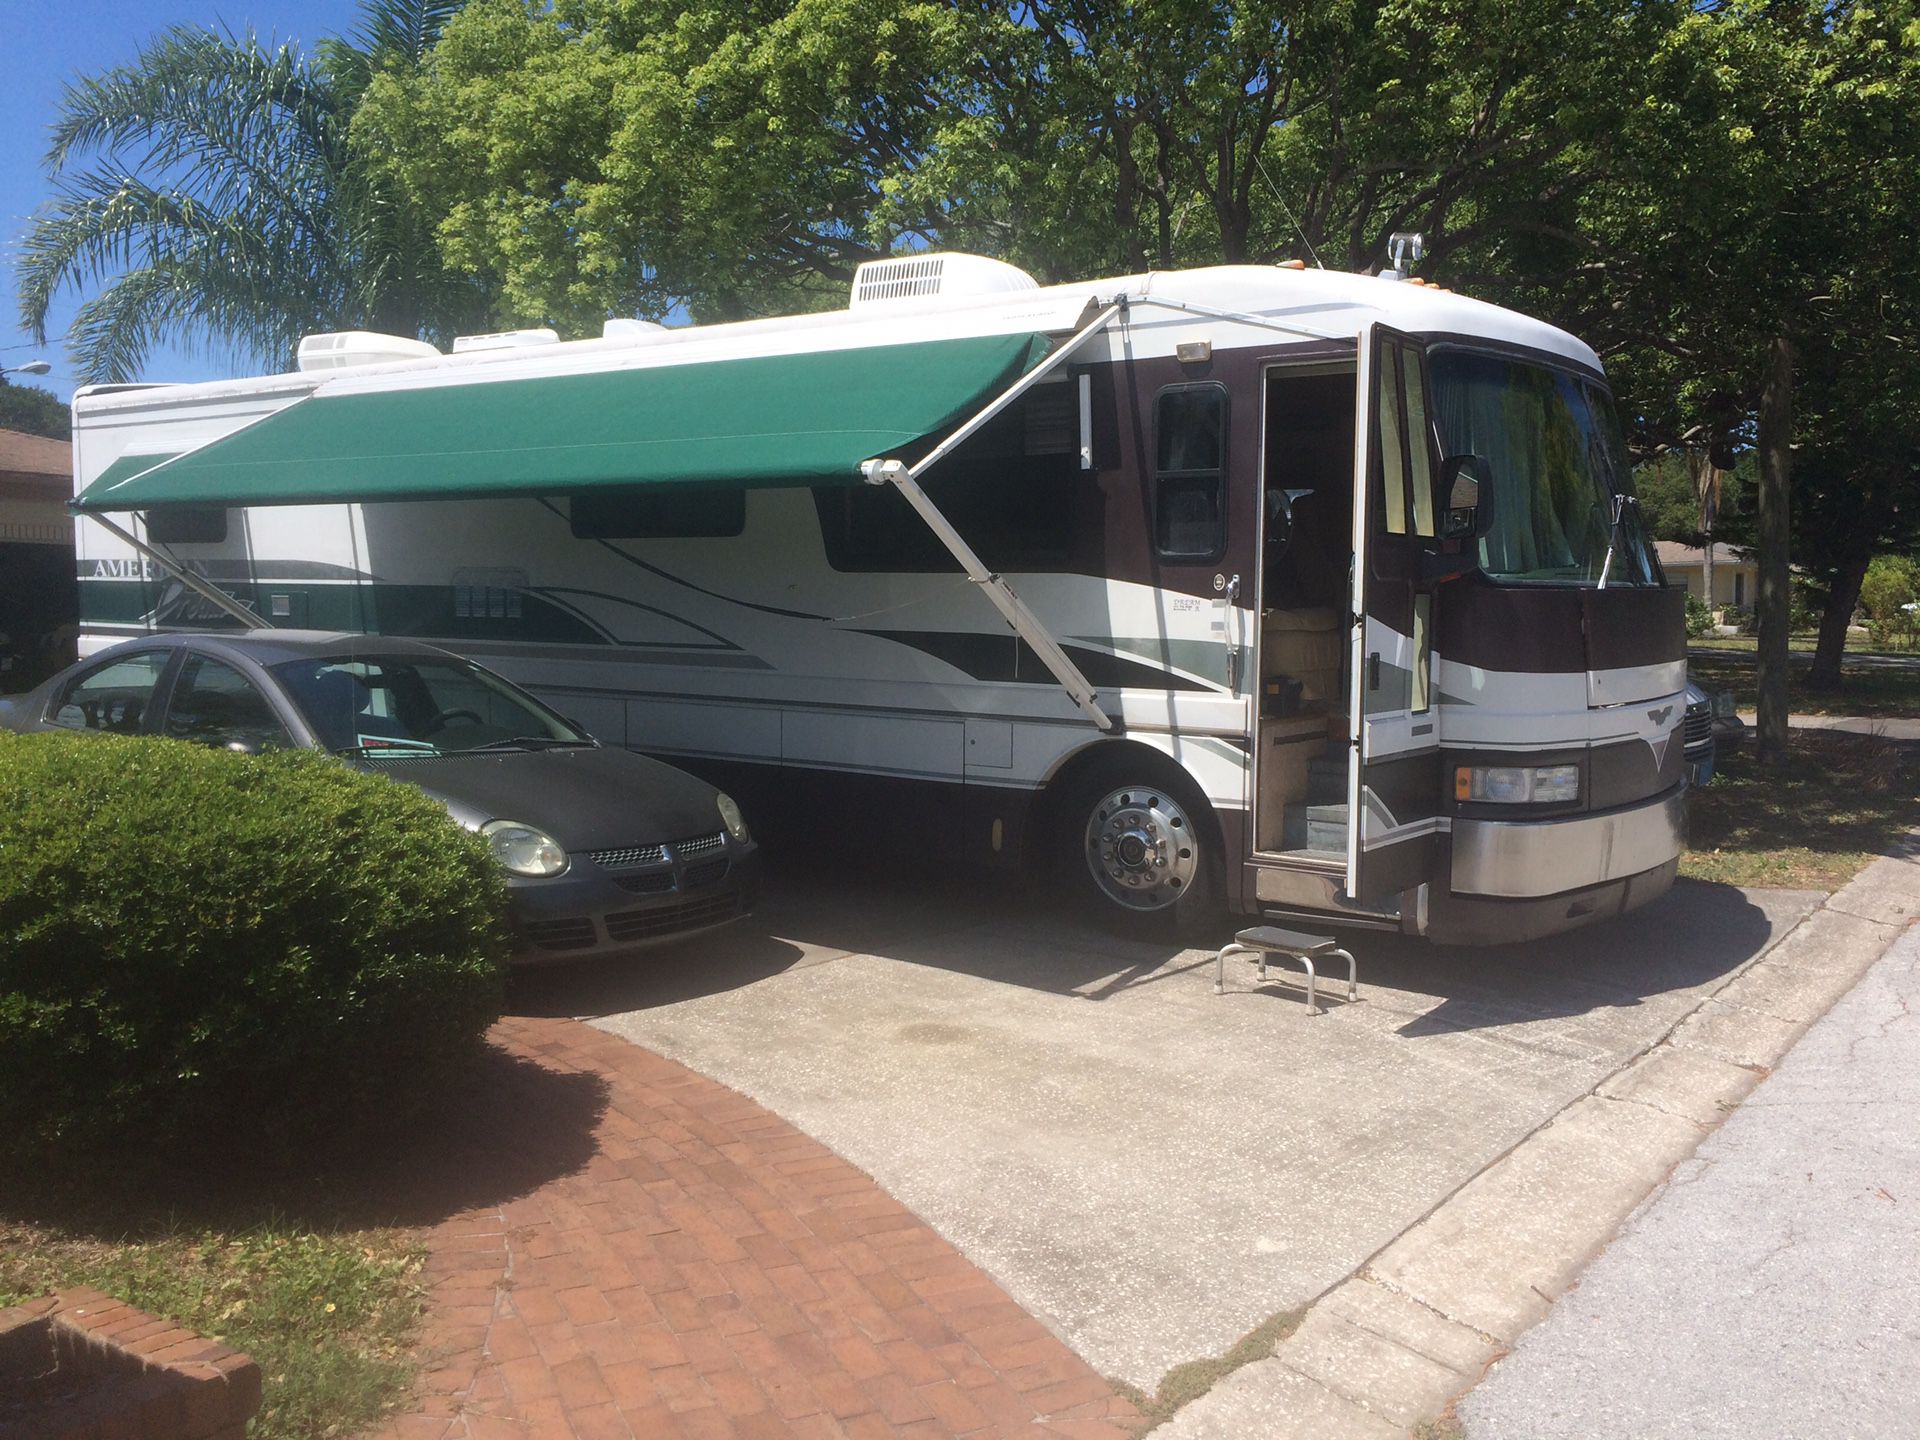 39’ American Dream Motorhome 2nd owner. 300 hp Cummins turbo diesel with an automatic 6 speed Allison transmission, jake brake way to much to mentio